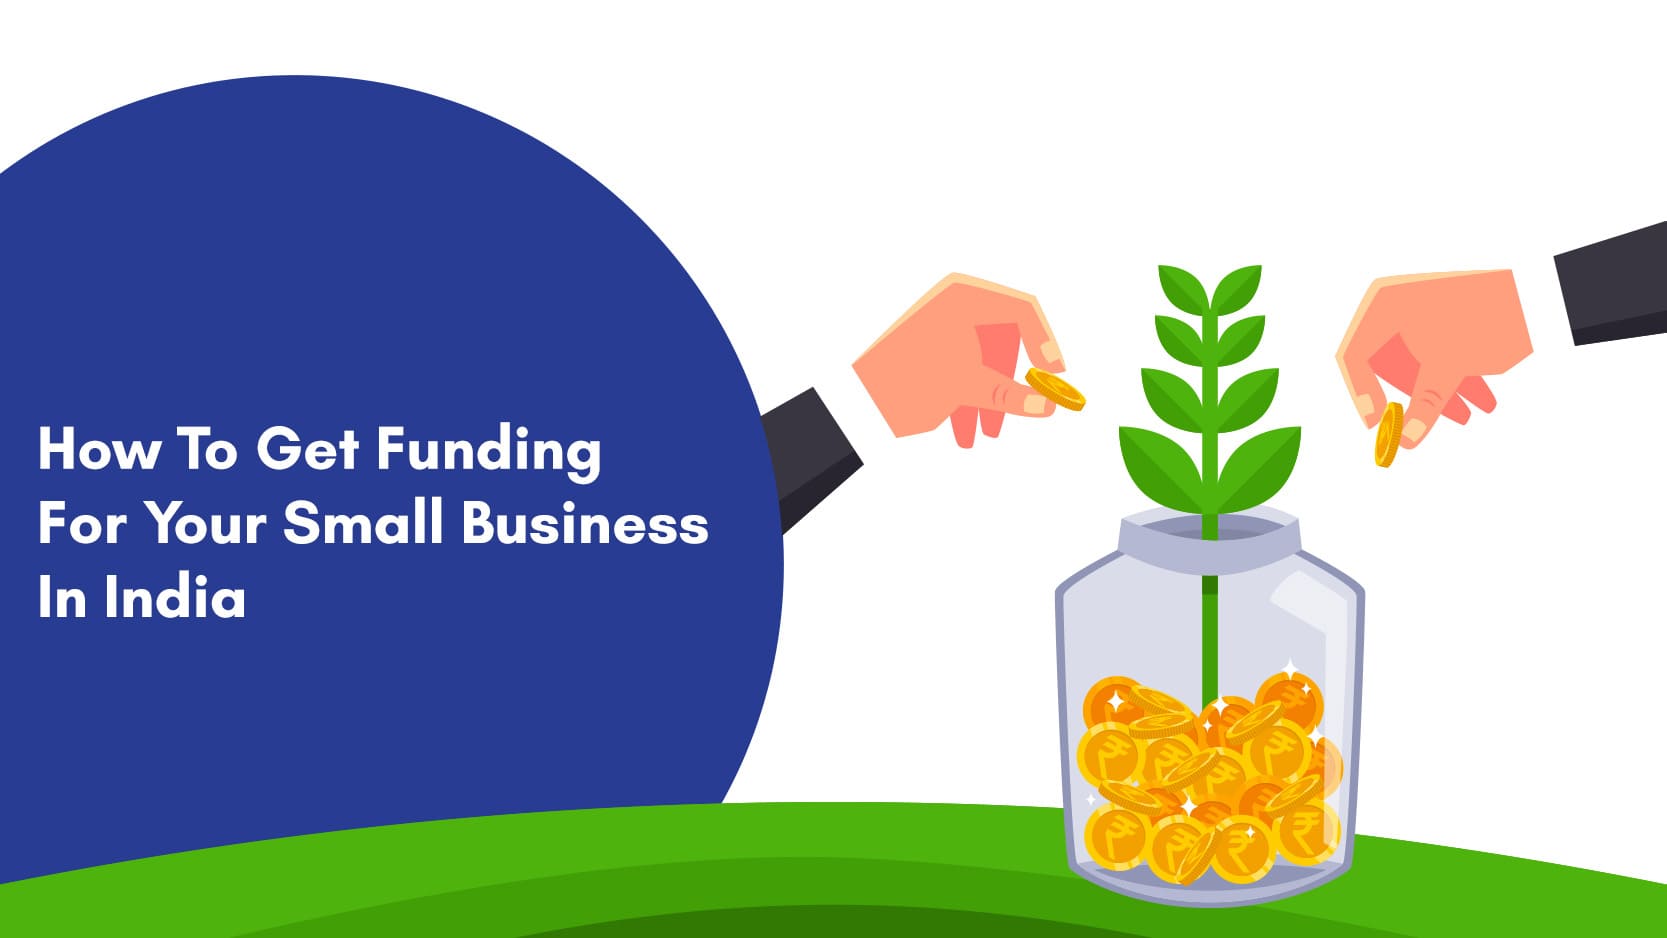 How to Get Funding For Your Small Business in India: Complete Guide